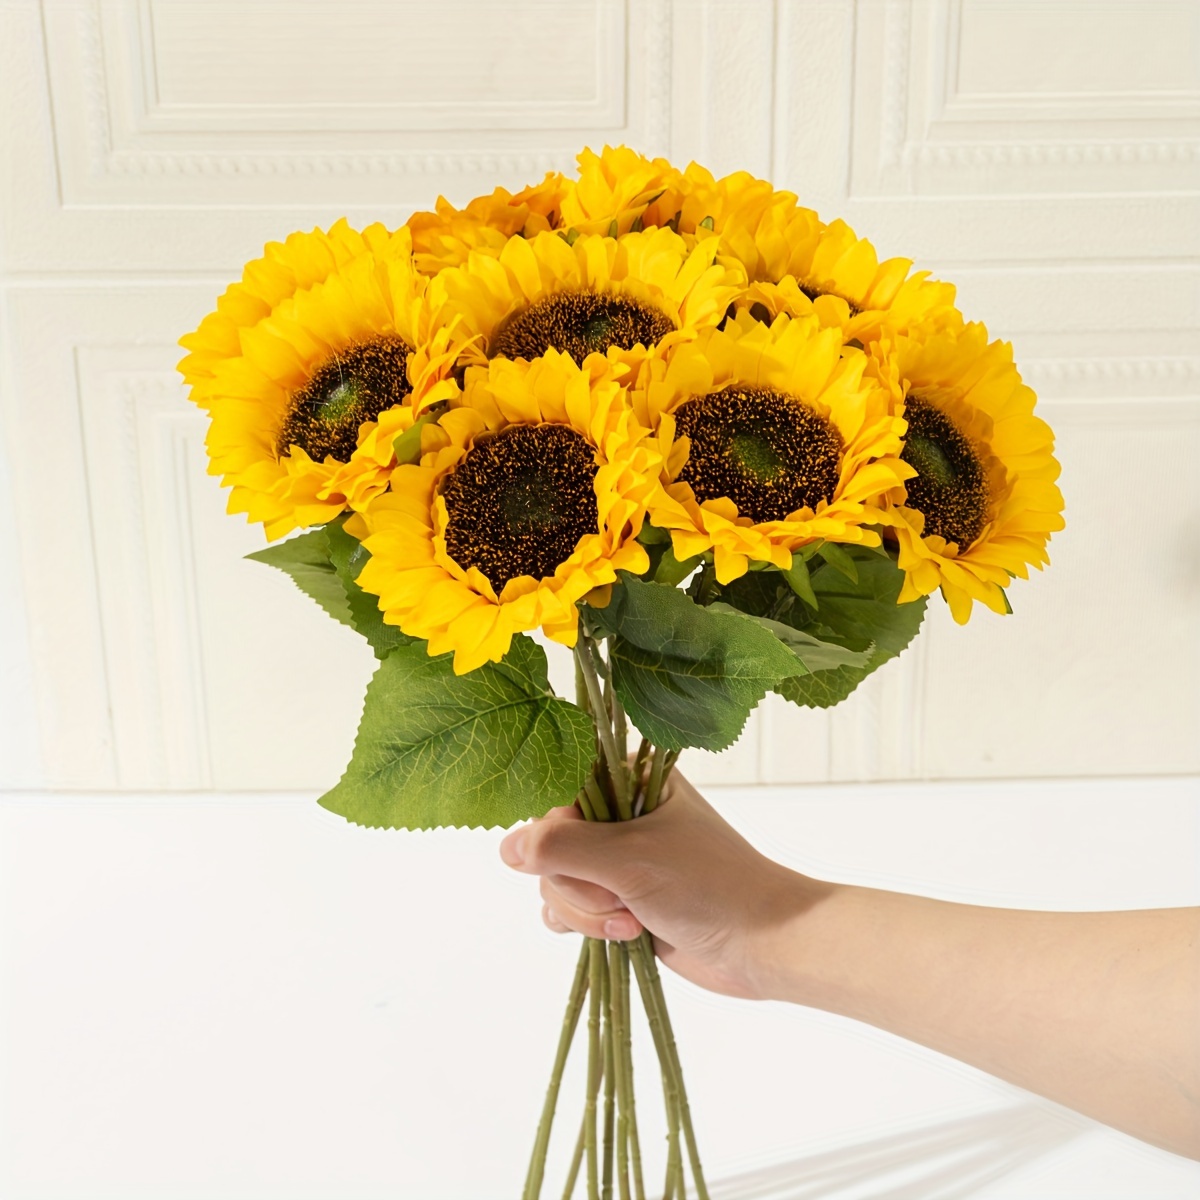 

6pcs Artificial Sunflower Flowers With Long Stem, Fake Sunflowers Decoration, Suitable For Home Wedding Birthday Party Decor, Yellow Flower Spring Summer Decor, Outdoor Indoor Decor